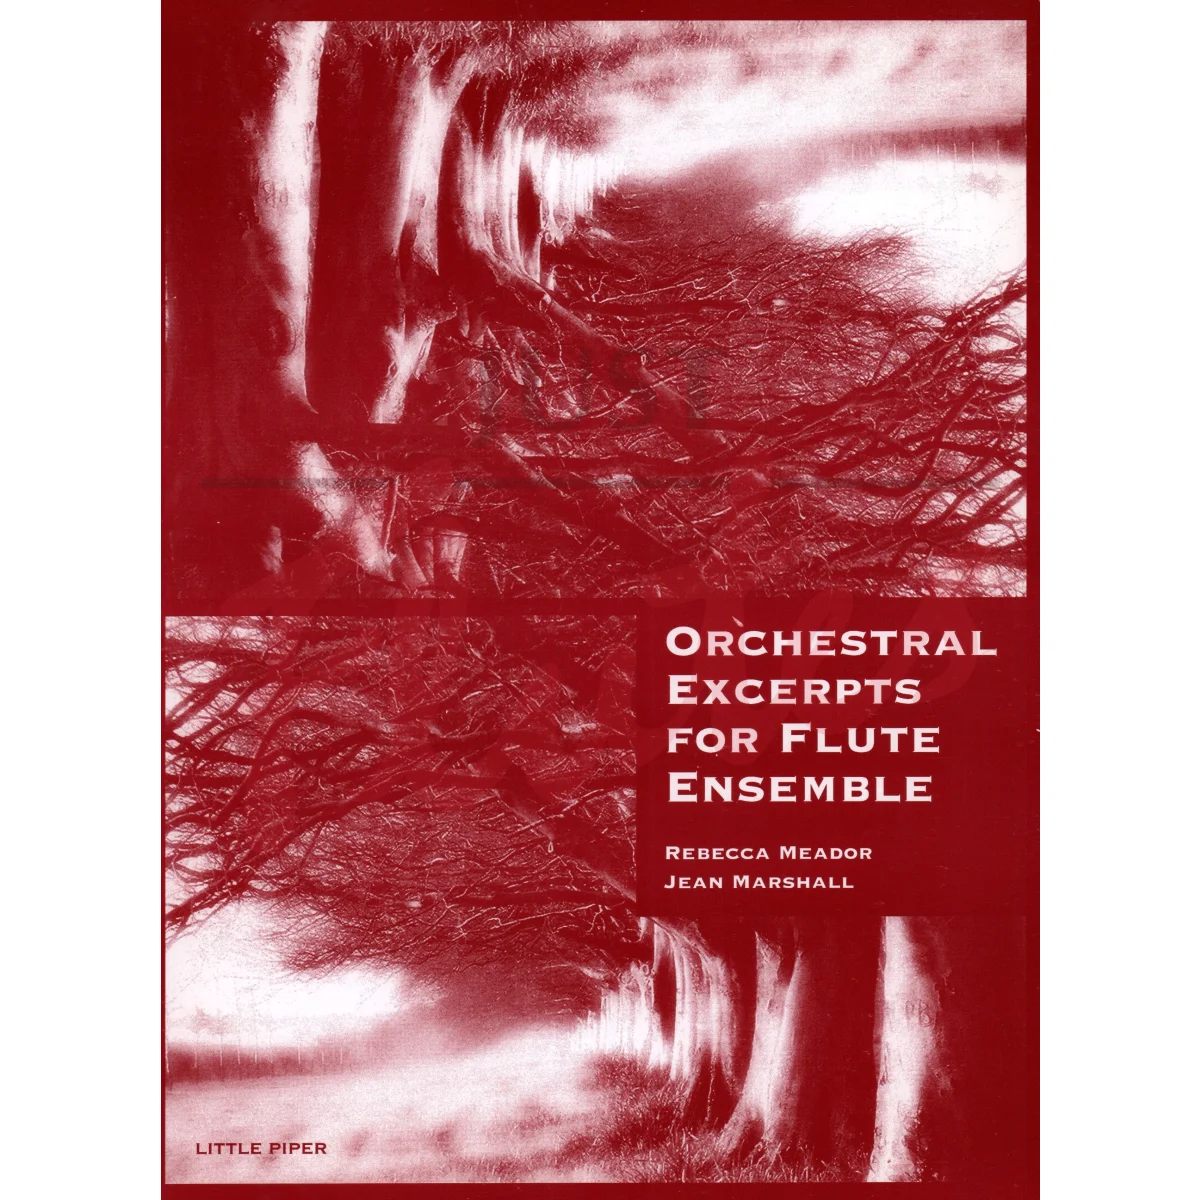 Orchestral Excerpts for Flute Ensemble